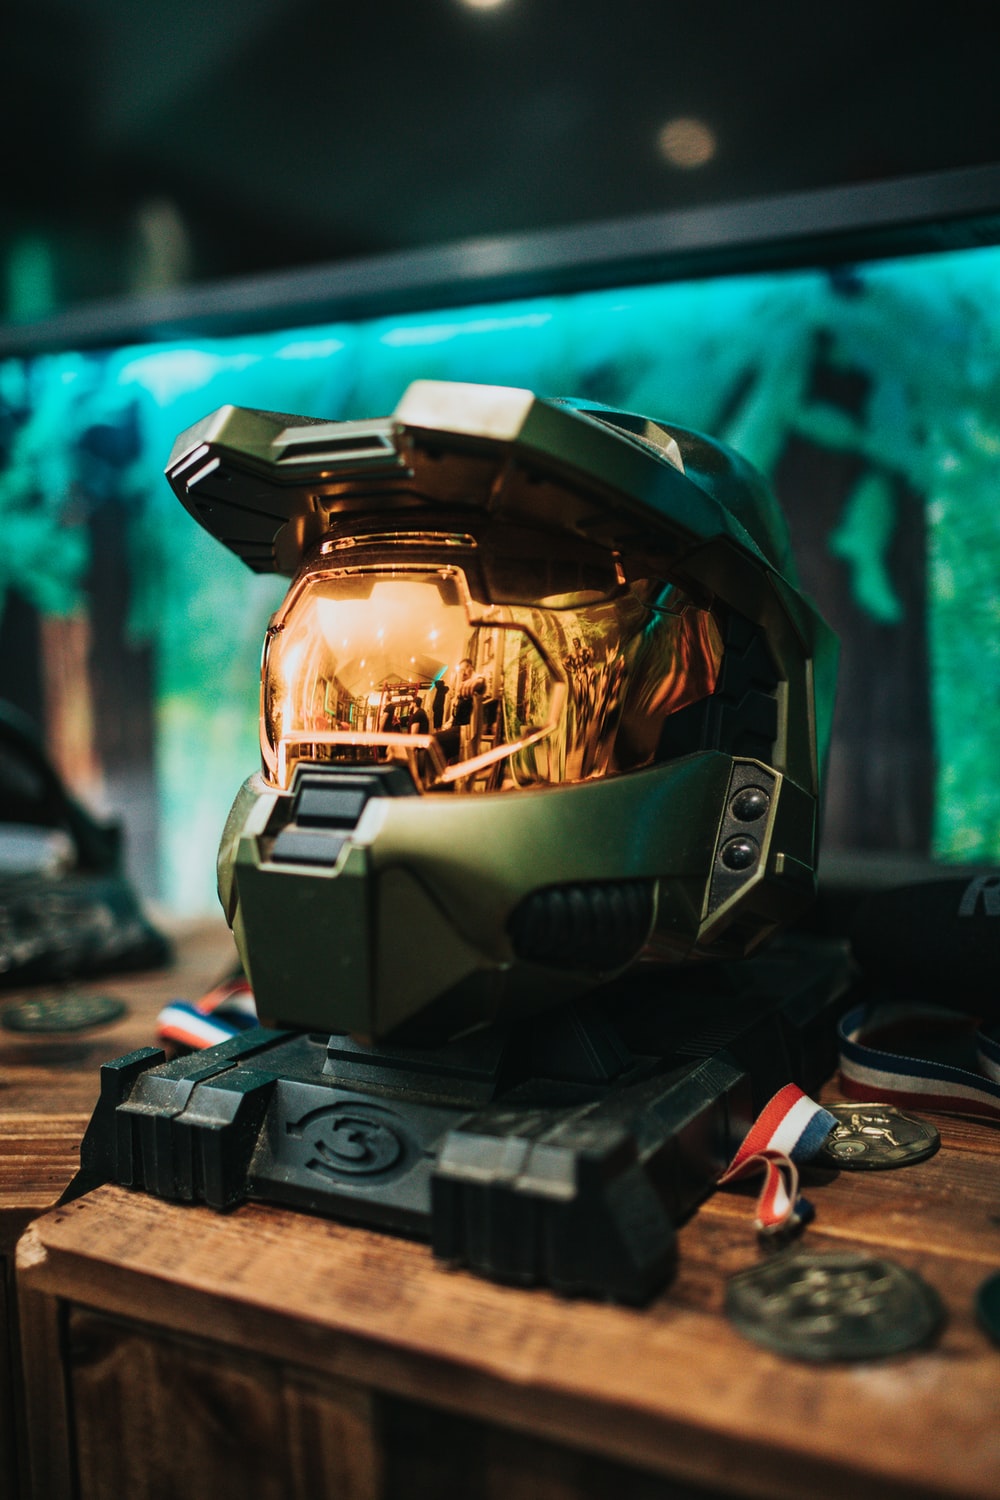 Halo Picture [HD]. Download Free Image